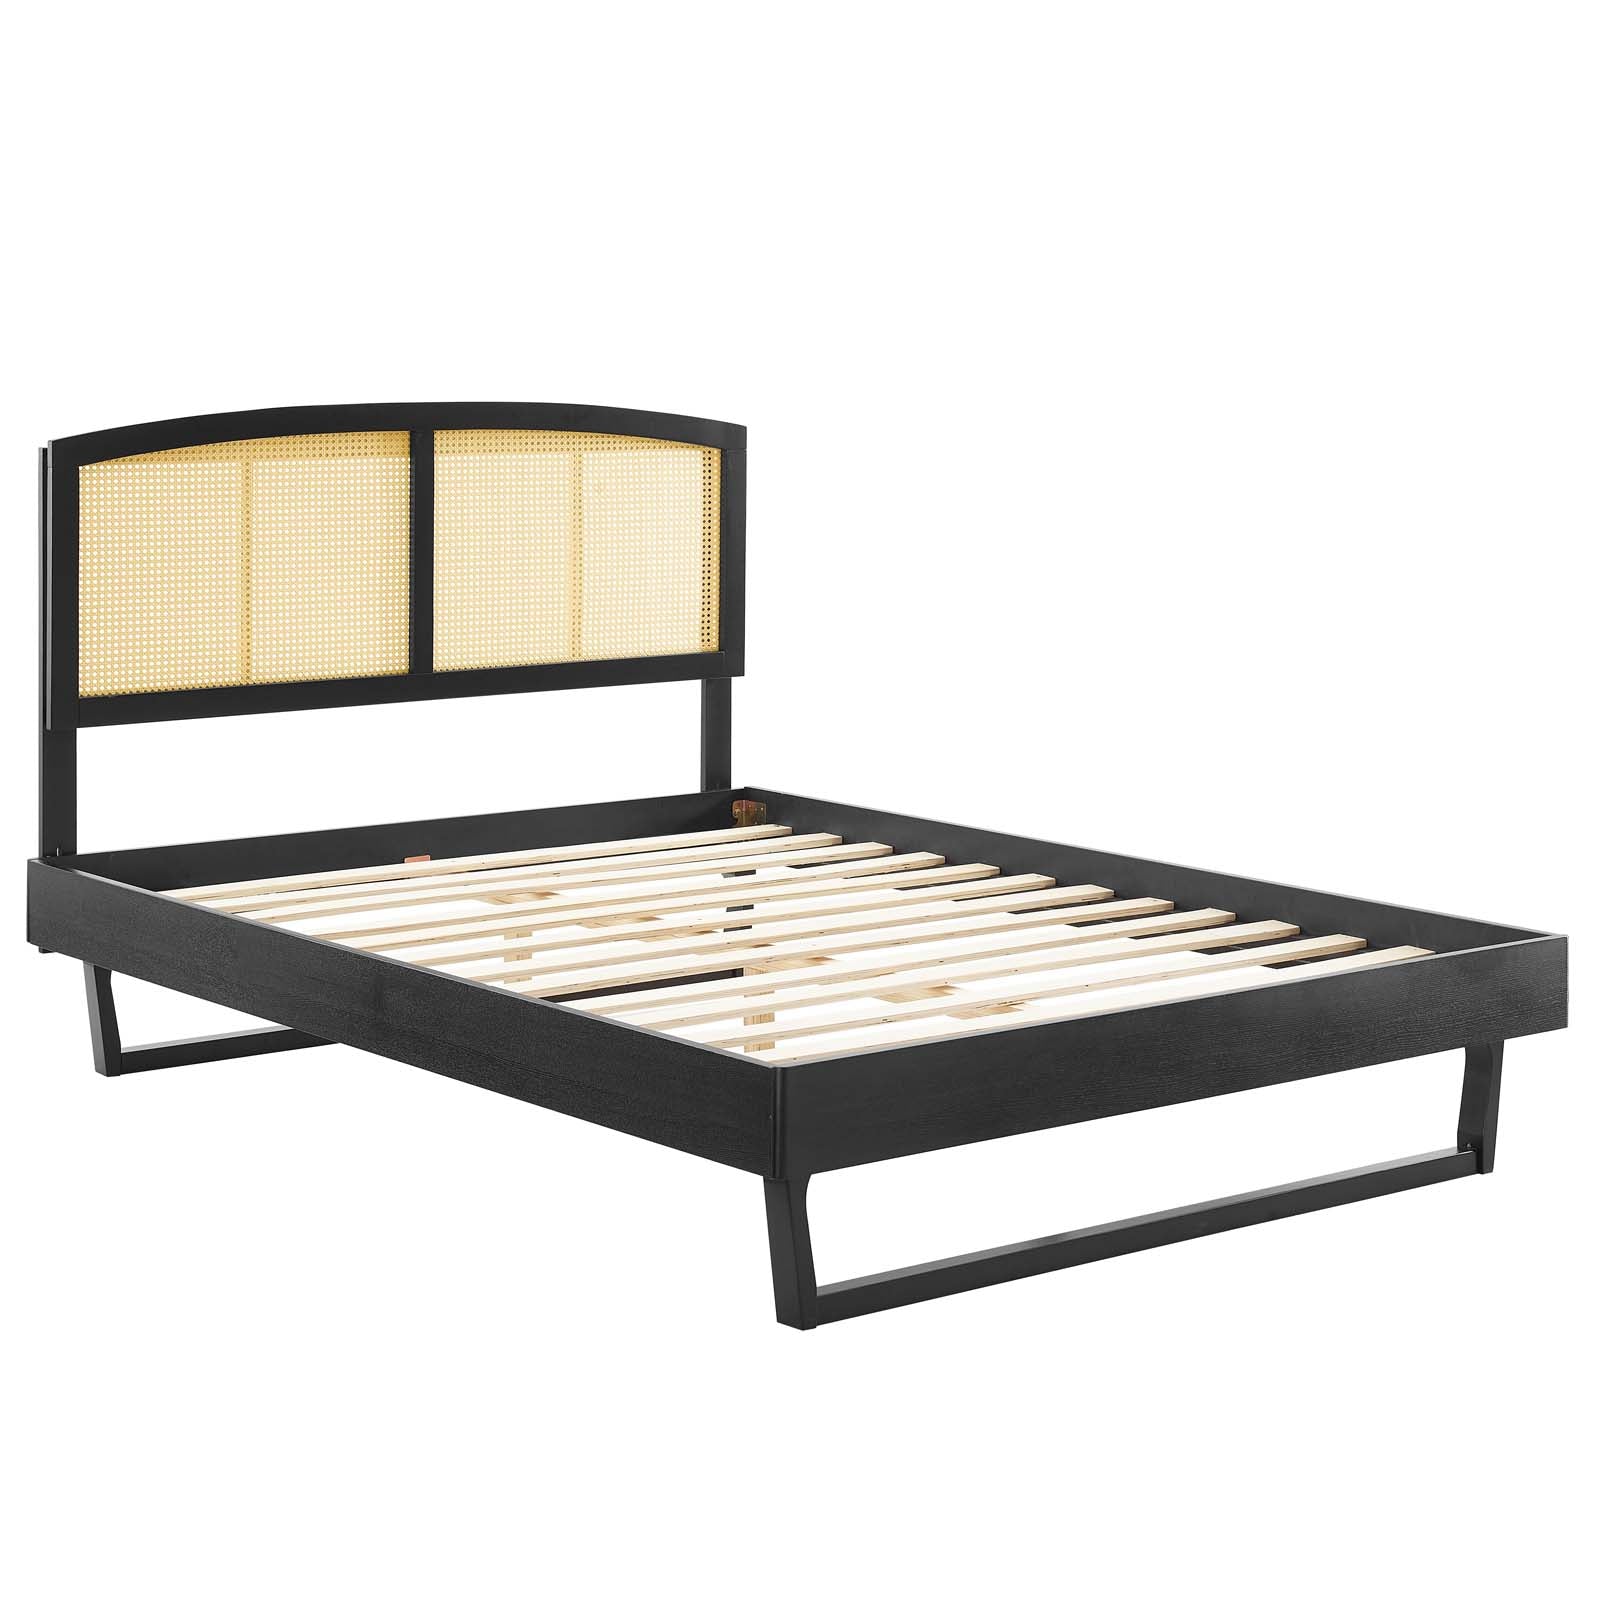 Sierra Cane and Wood Queen Platform Bed With Angular Legs - East Shore Modern Home Furnishings